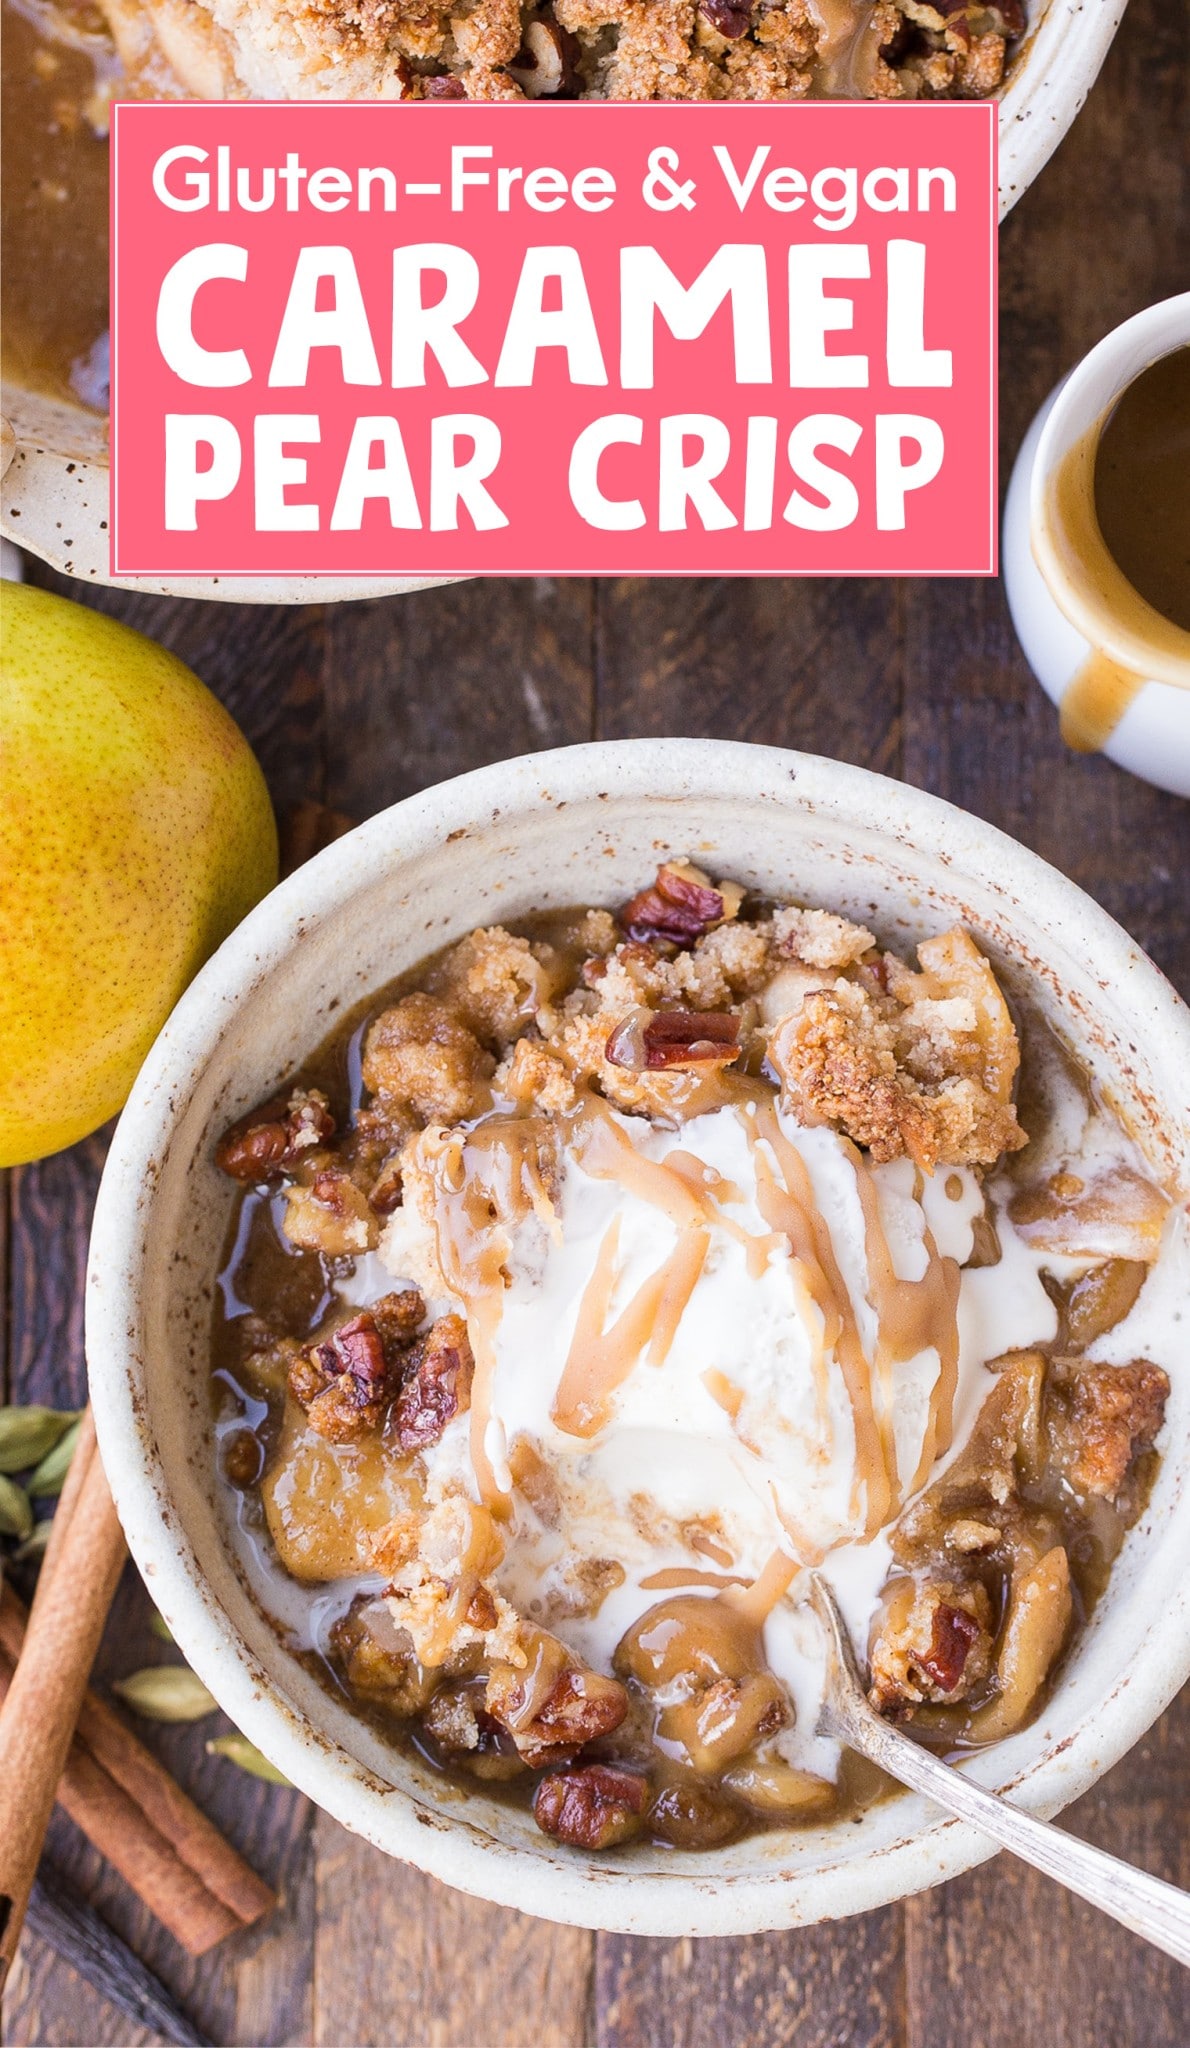 This Gluten-Free Vegan Caramel Pear Crisp is a decadent and deliciously spiced dessert that's perfect for pear season. The caramel pear filling is spiced with cinnamon, cardamom, cloves, and vanilla,. Don't forget to serve this gluten-free, paleo, and vegan crisp with whipped coconut cream!